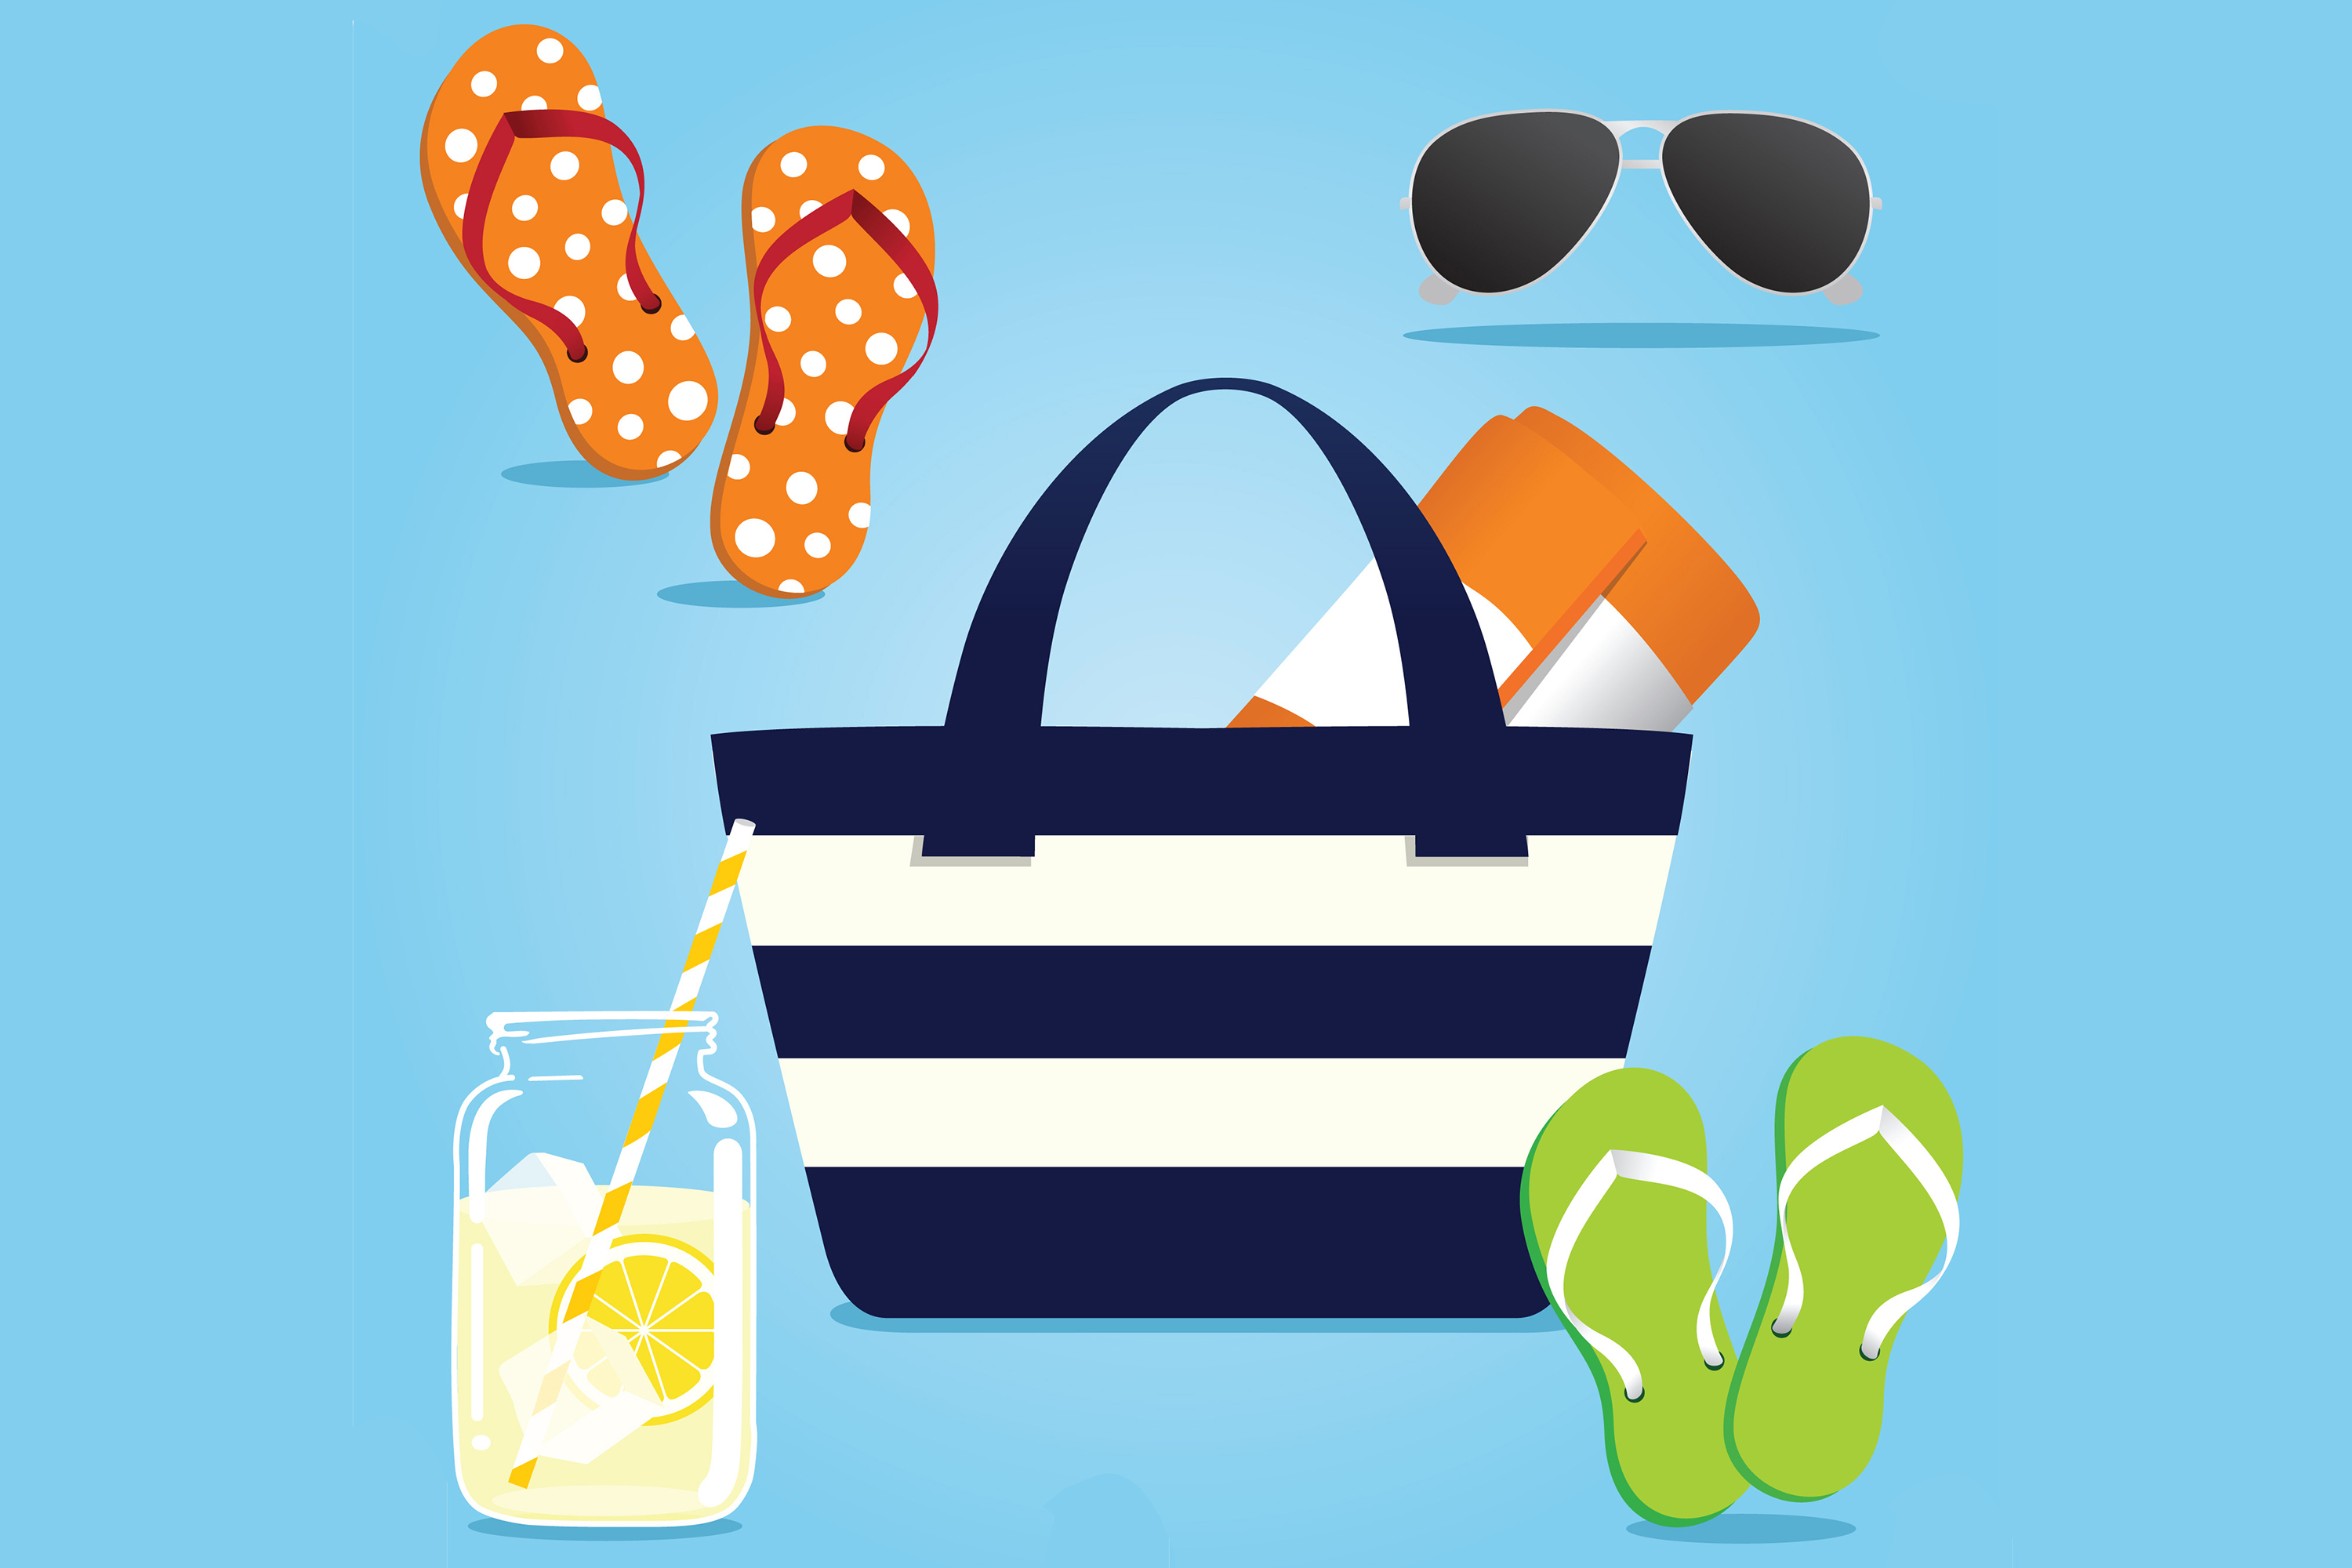 Paraphernalia for a day at the beach. (iStock Image)